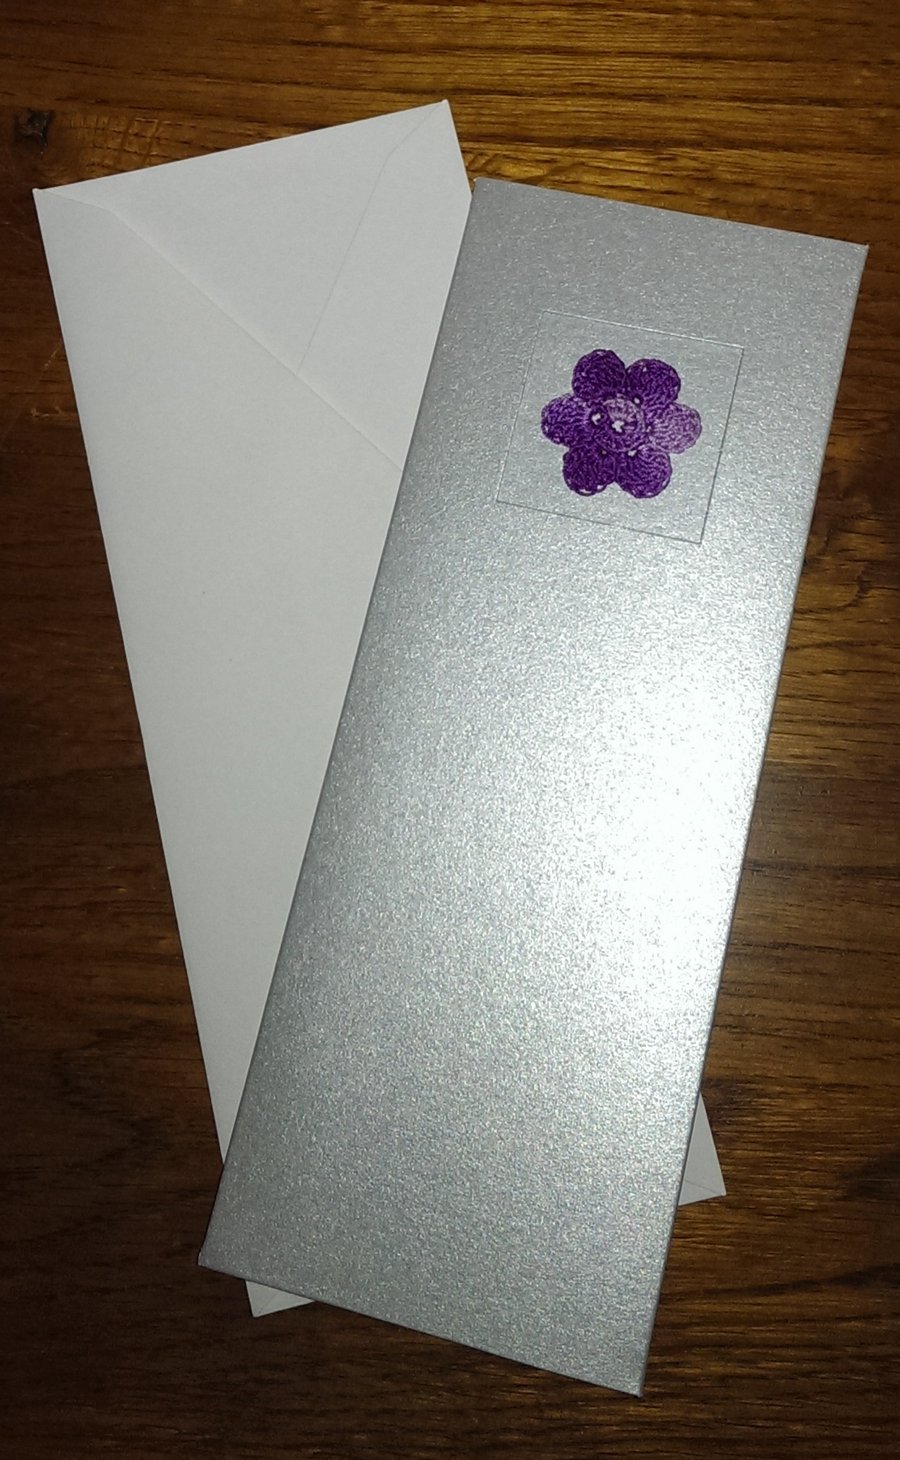 SLIMLINE SILVER CARD, WITH LILAC FLOWER - 7cm x 18.5cm BLANK TO PERSONALISE